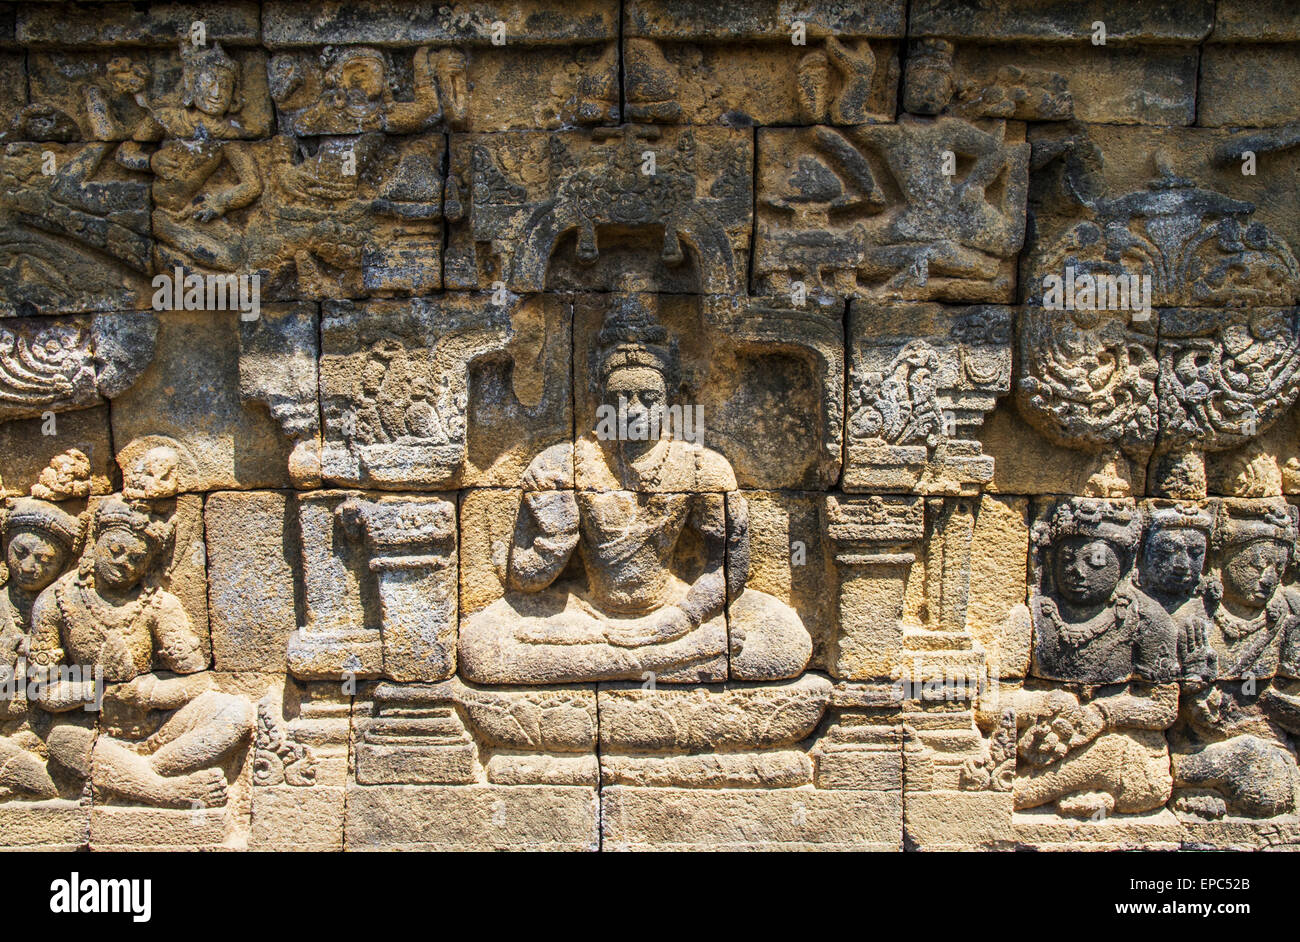 Borobudur relief gallery hi-res images photography - Alamy stock and